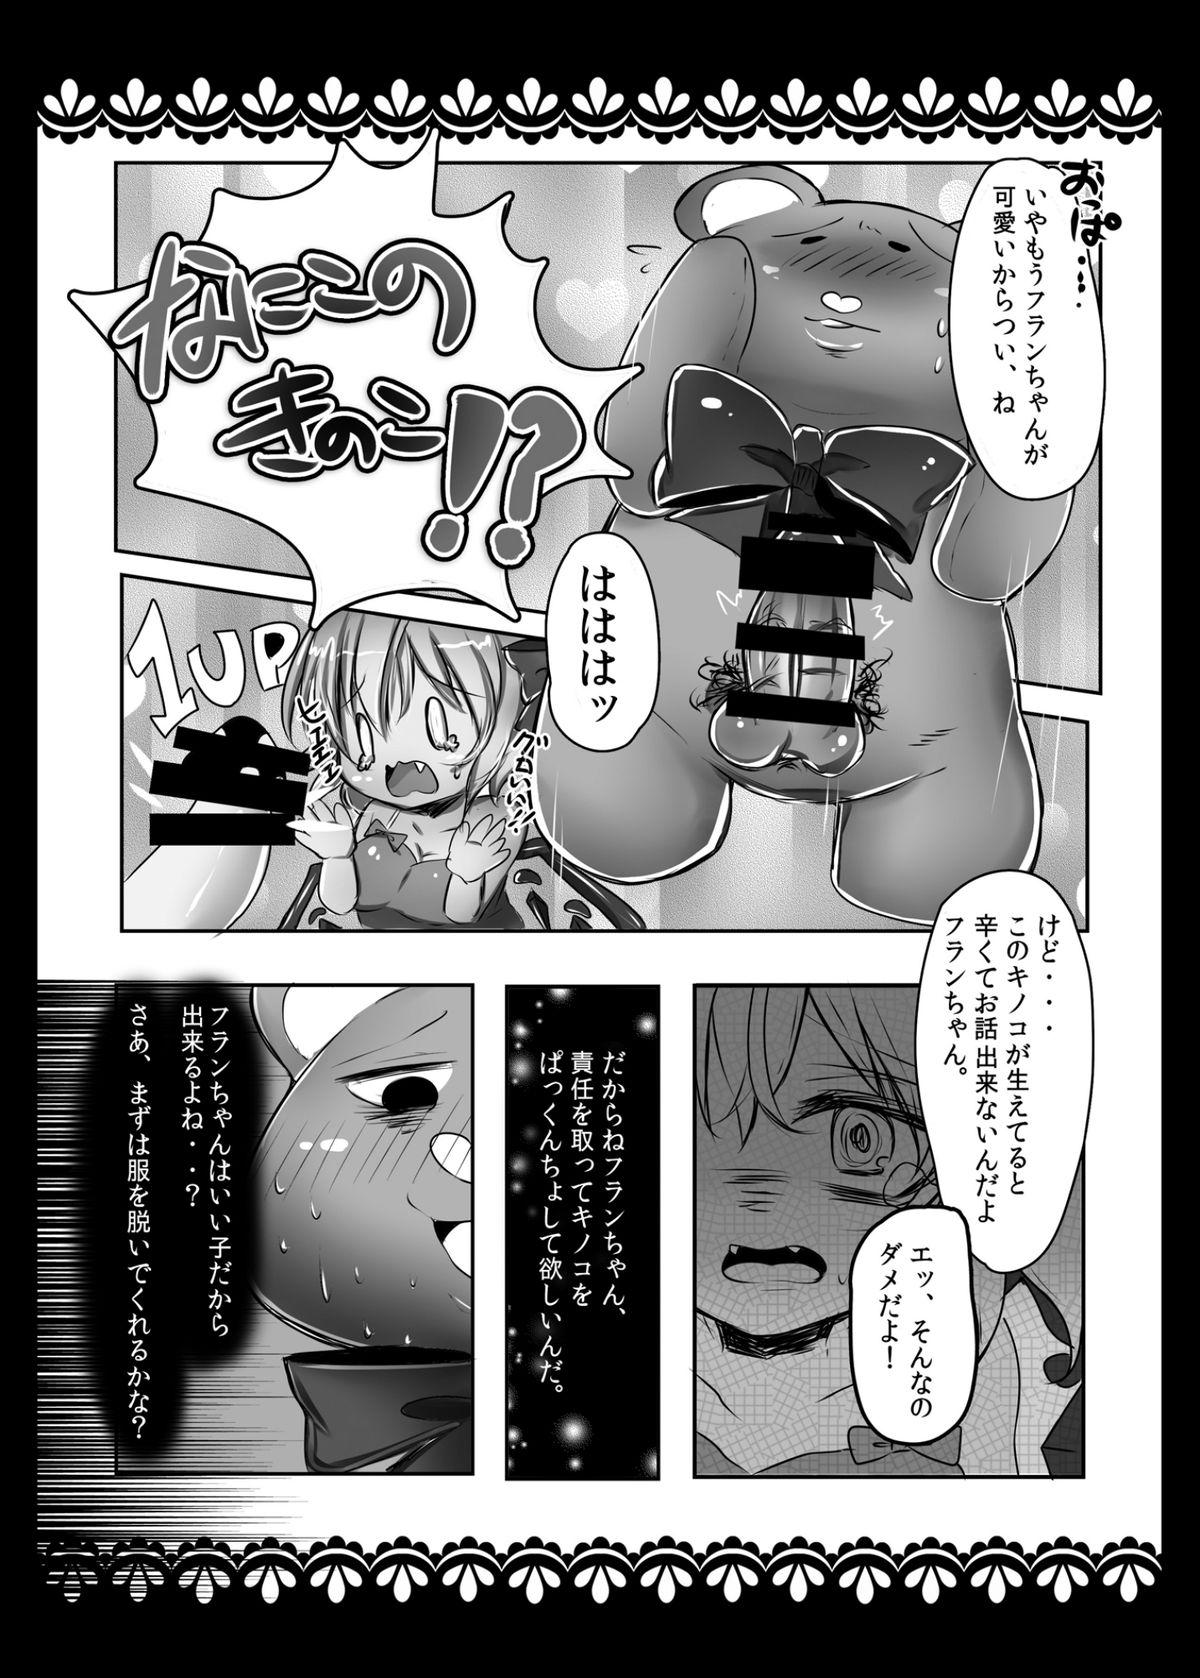 Roughsex Stuffed Animal Paco - Touhou project Granny - Page 8